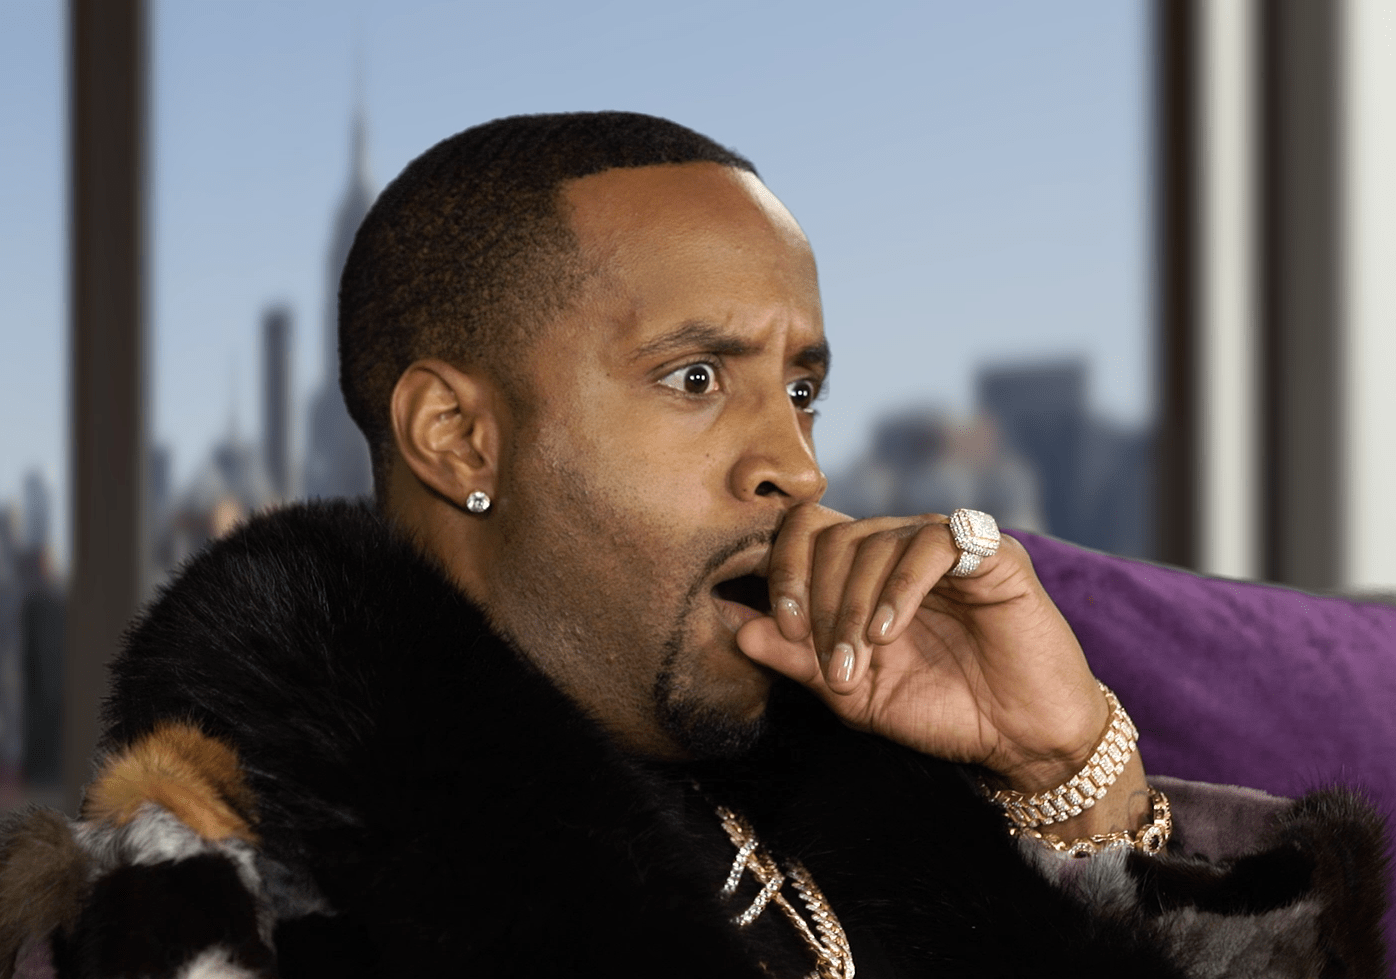 Safaree Seems To Support An Idea Claiming That Bill Gates Predicted Or Planned The Coronavirus - Watch This Video